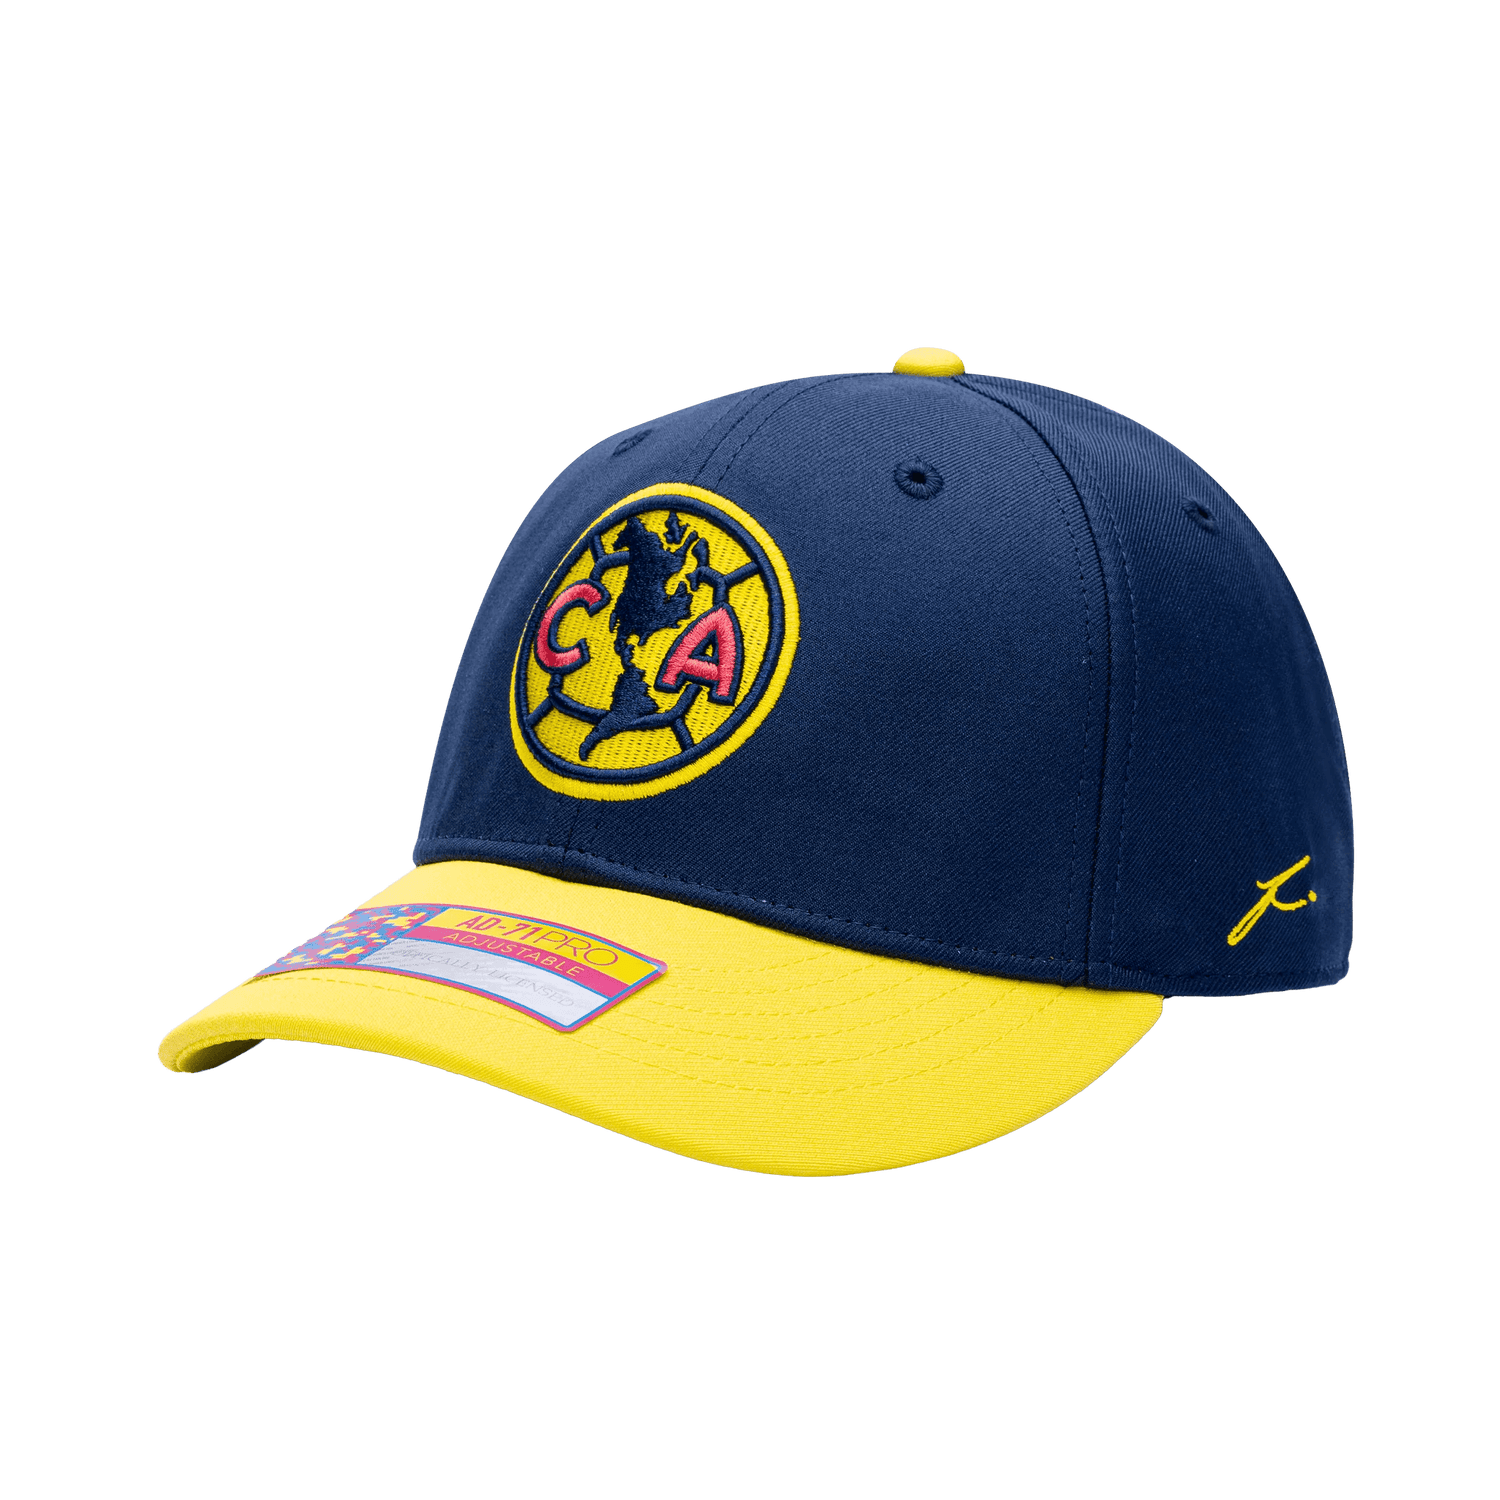 FI Collection Club America Bambo Classic Hat Navy/Yellow (Lateral - Side 1)